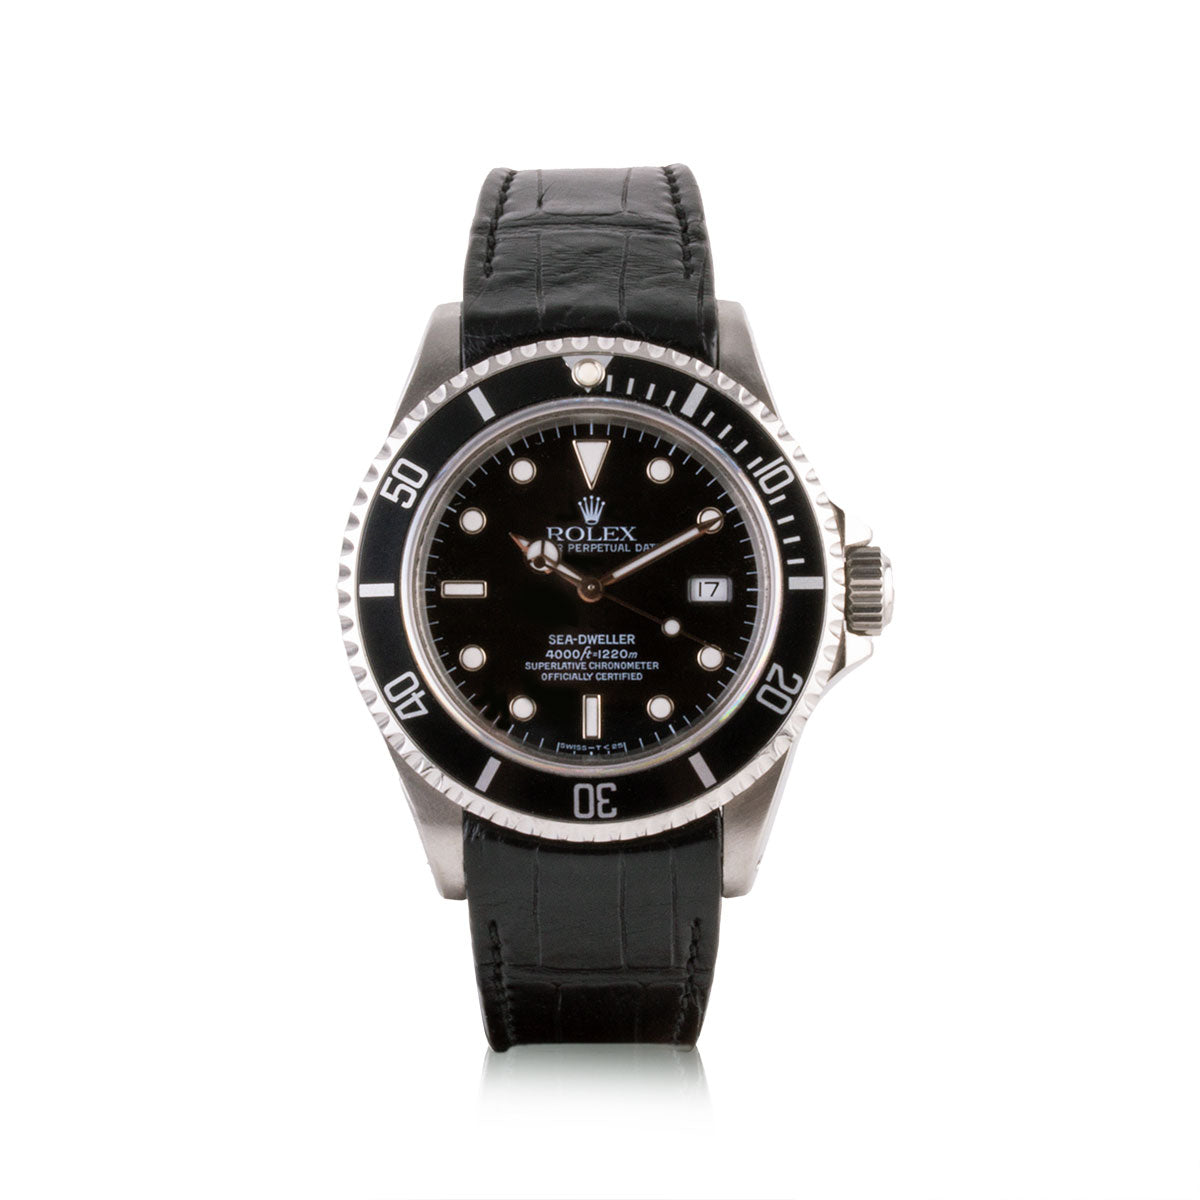 Montre d'occasion - Rolex - Oyster Perpetual Date Sea-Dweller - 14000€